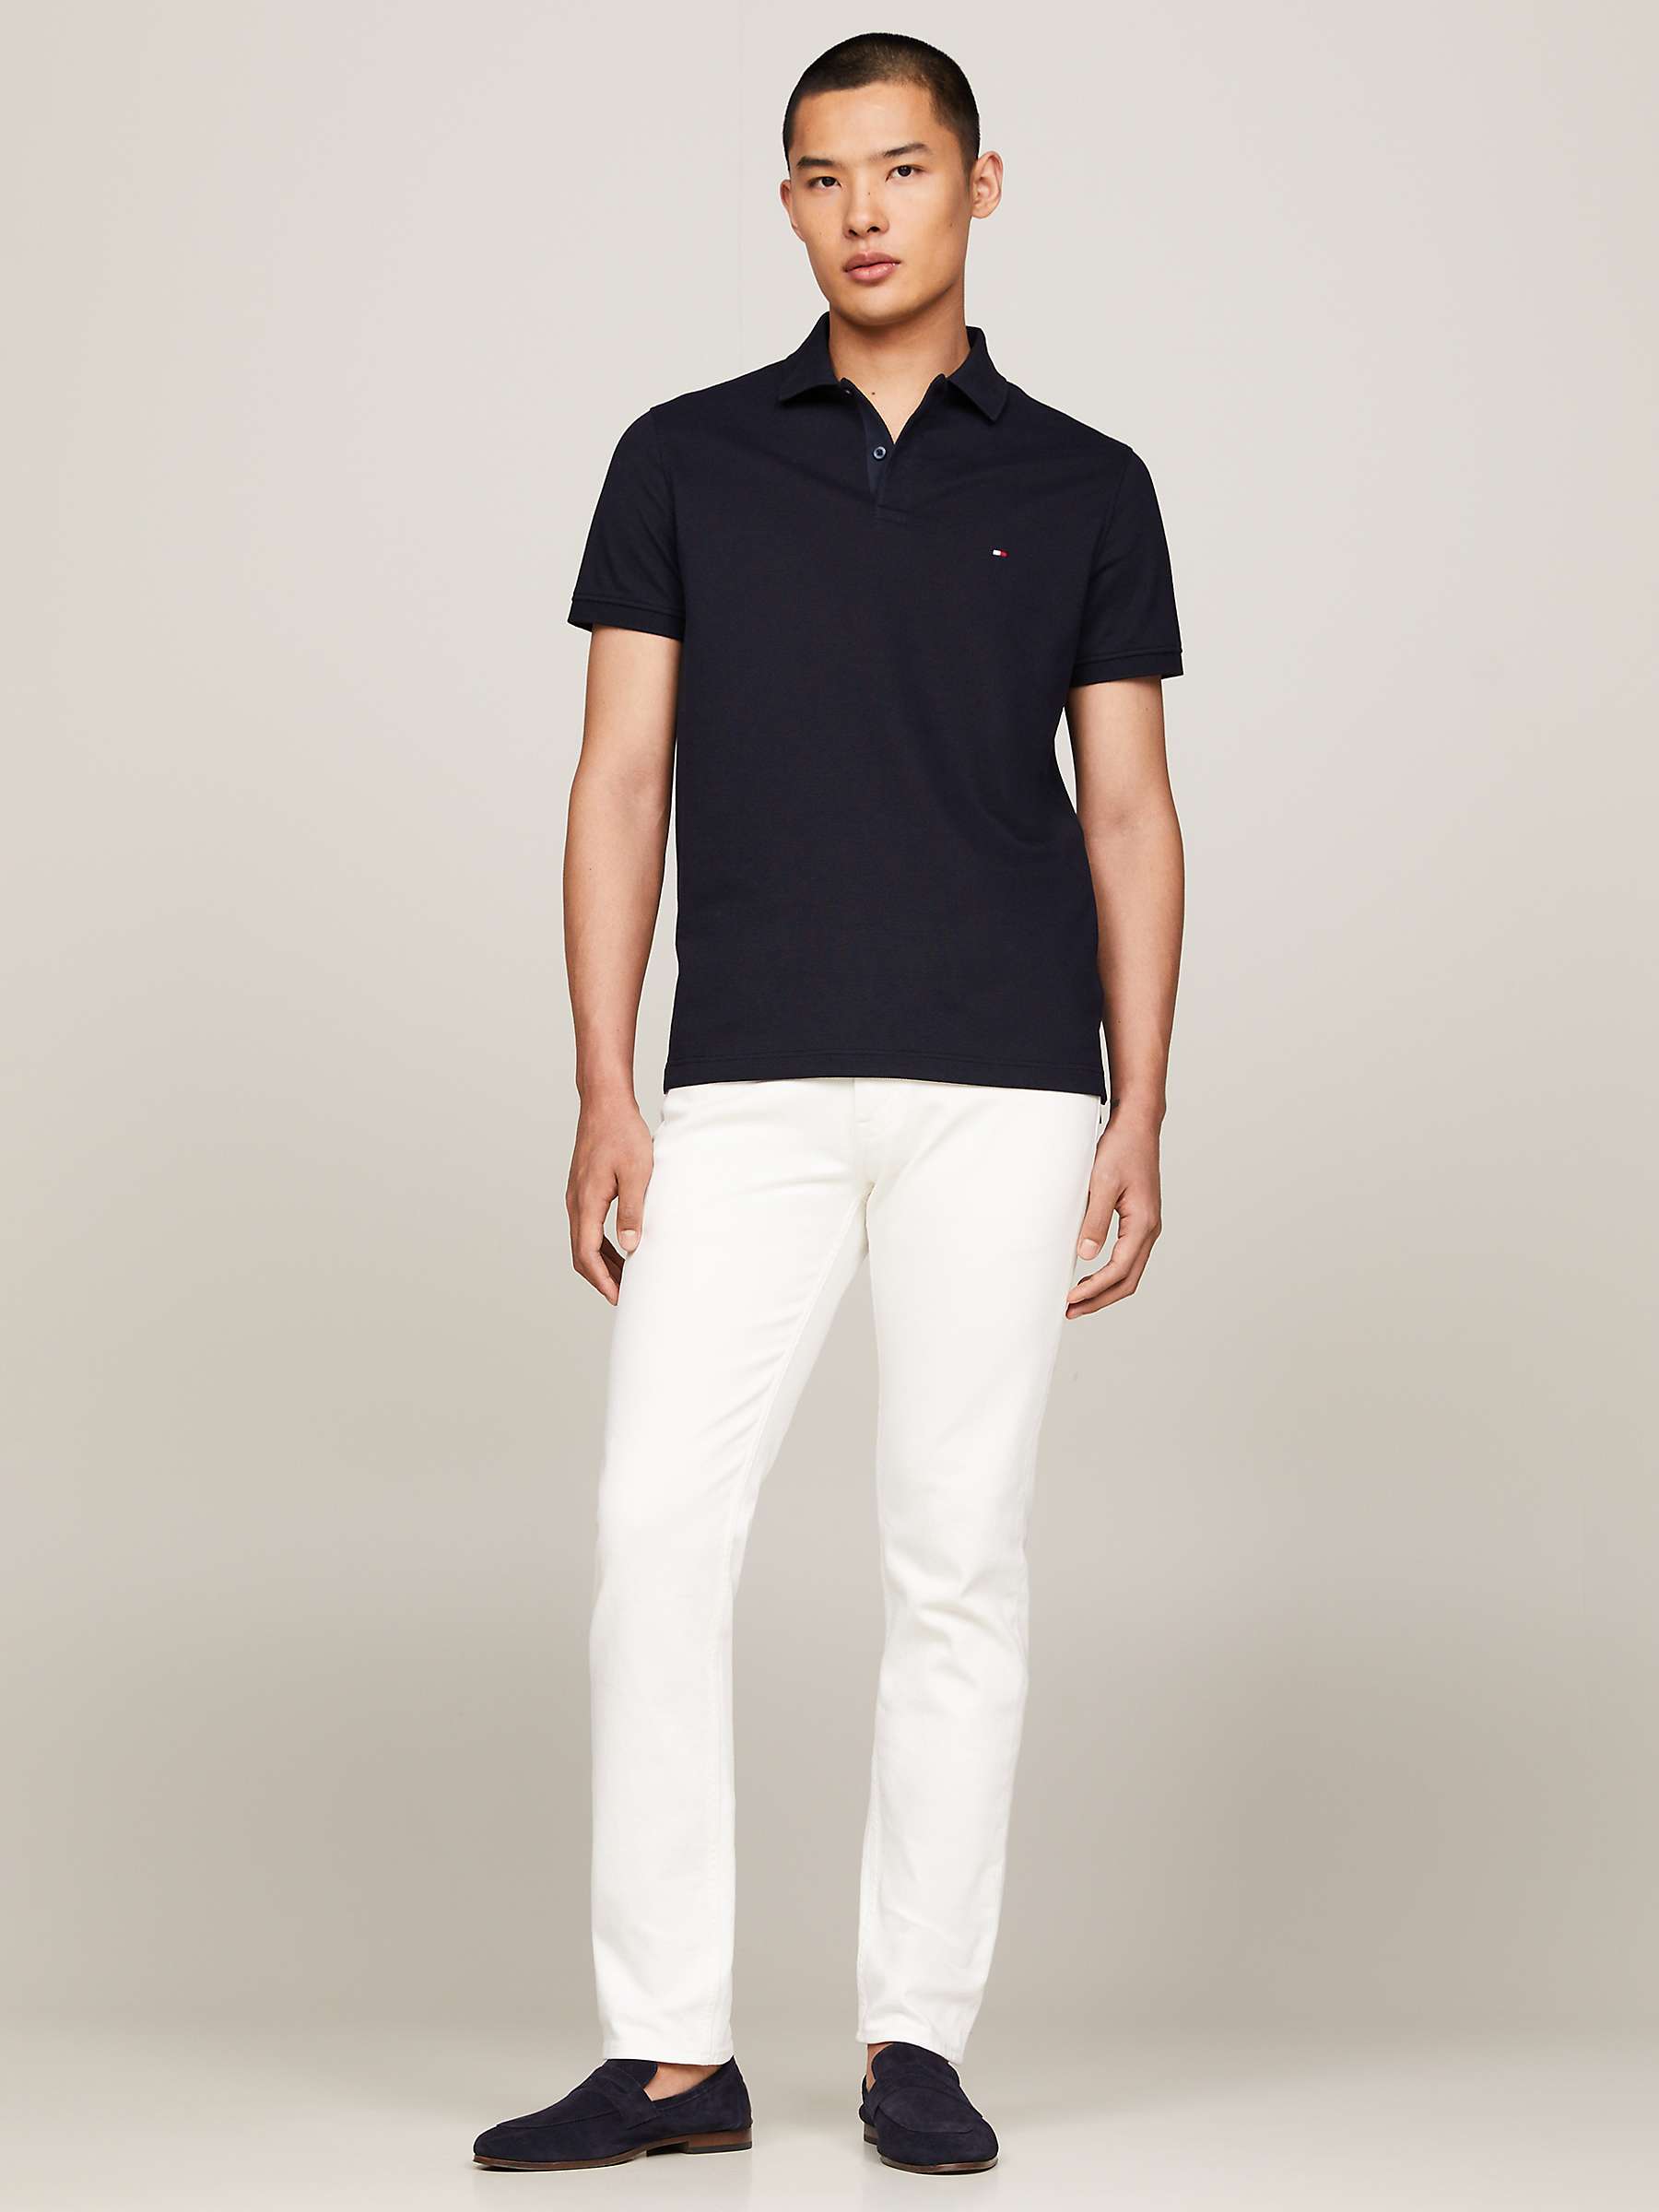 Buy Tommy Hilfiger Bubble Stitch Polo Top Online at johnlewis.com